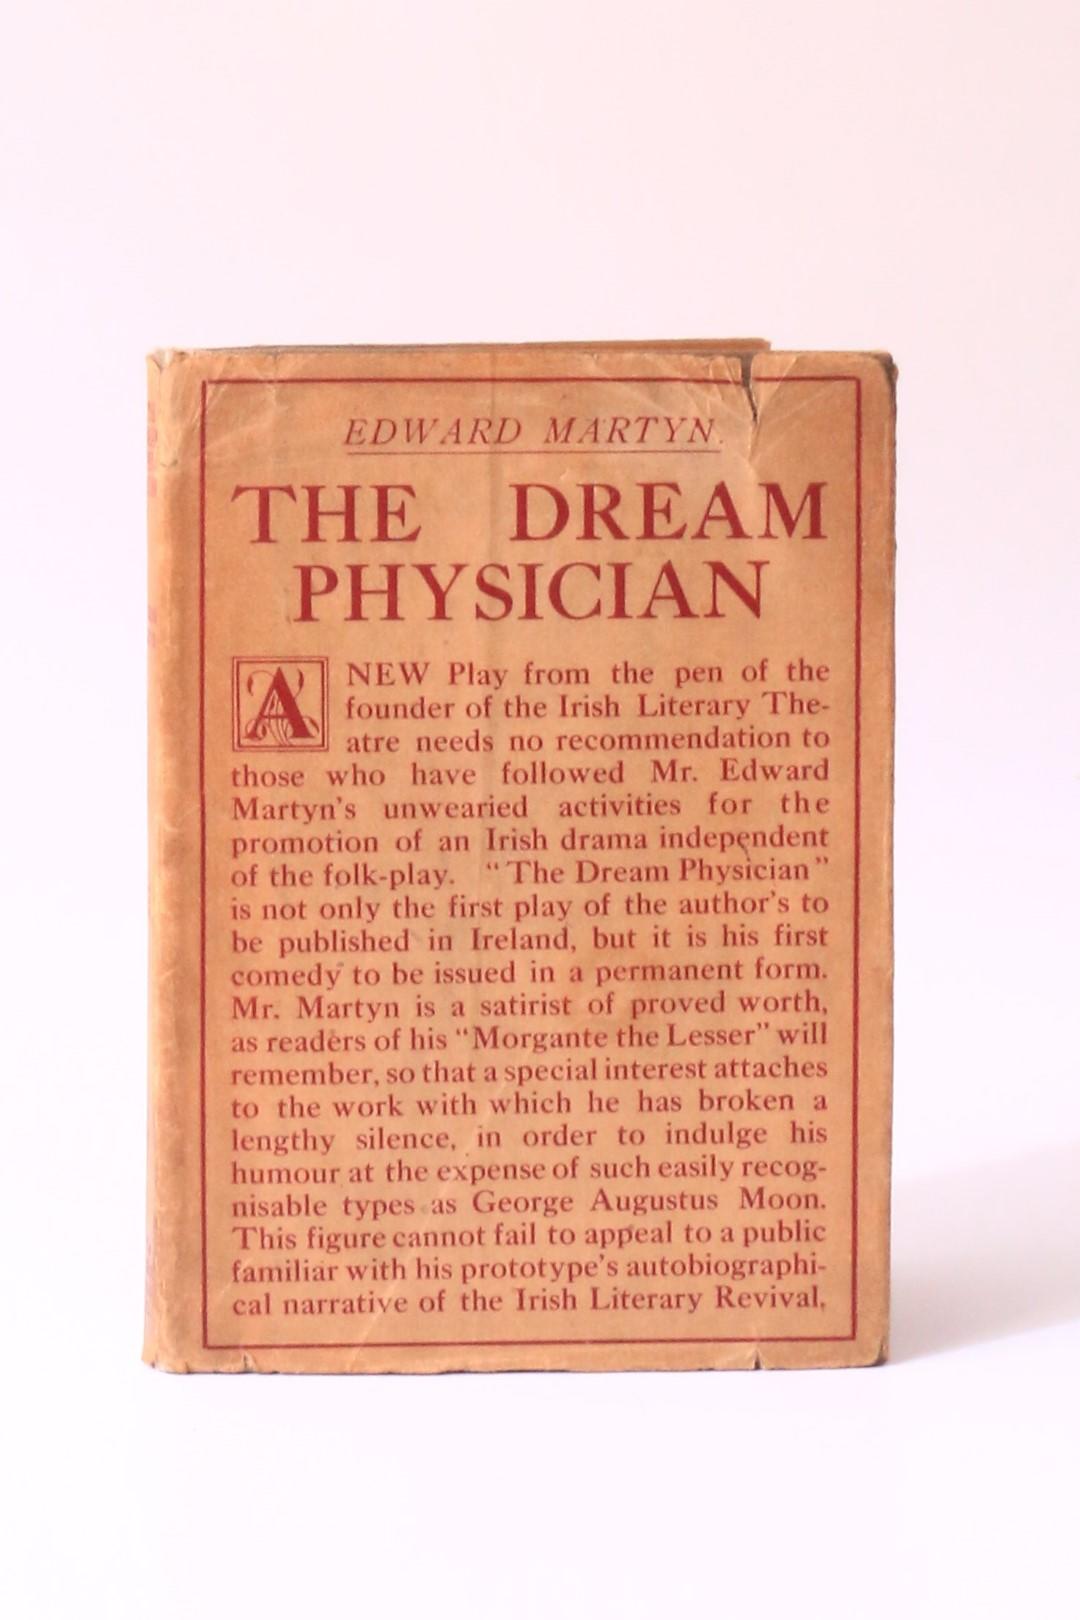 Edward Martyn - The Dream Physician - The Talbot Press and T. Fisher Unwin, 1915, First Edition.